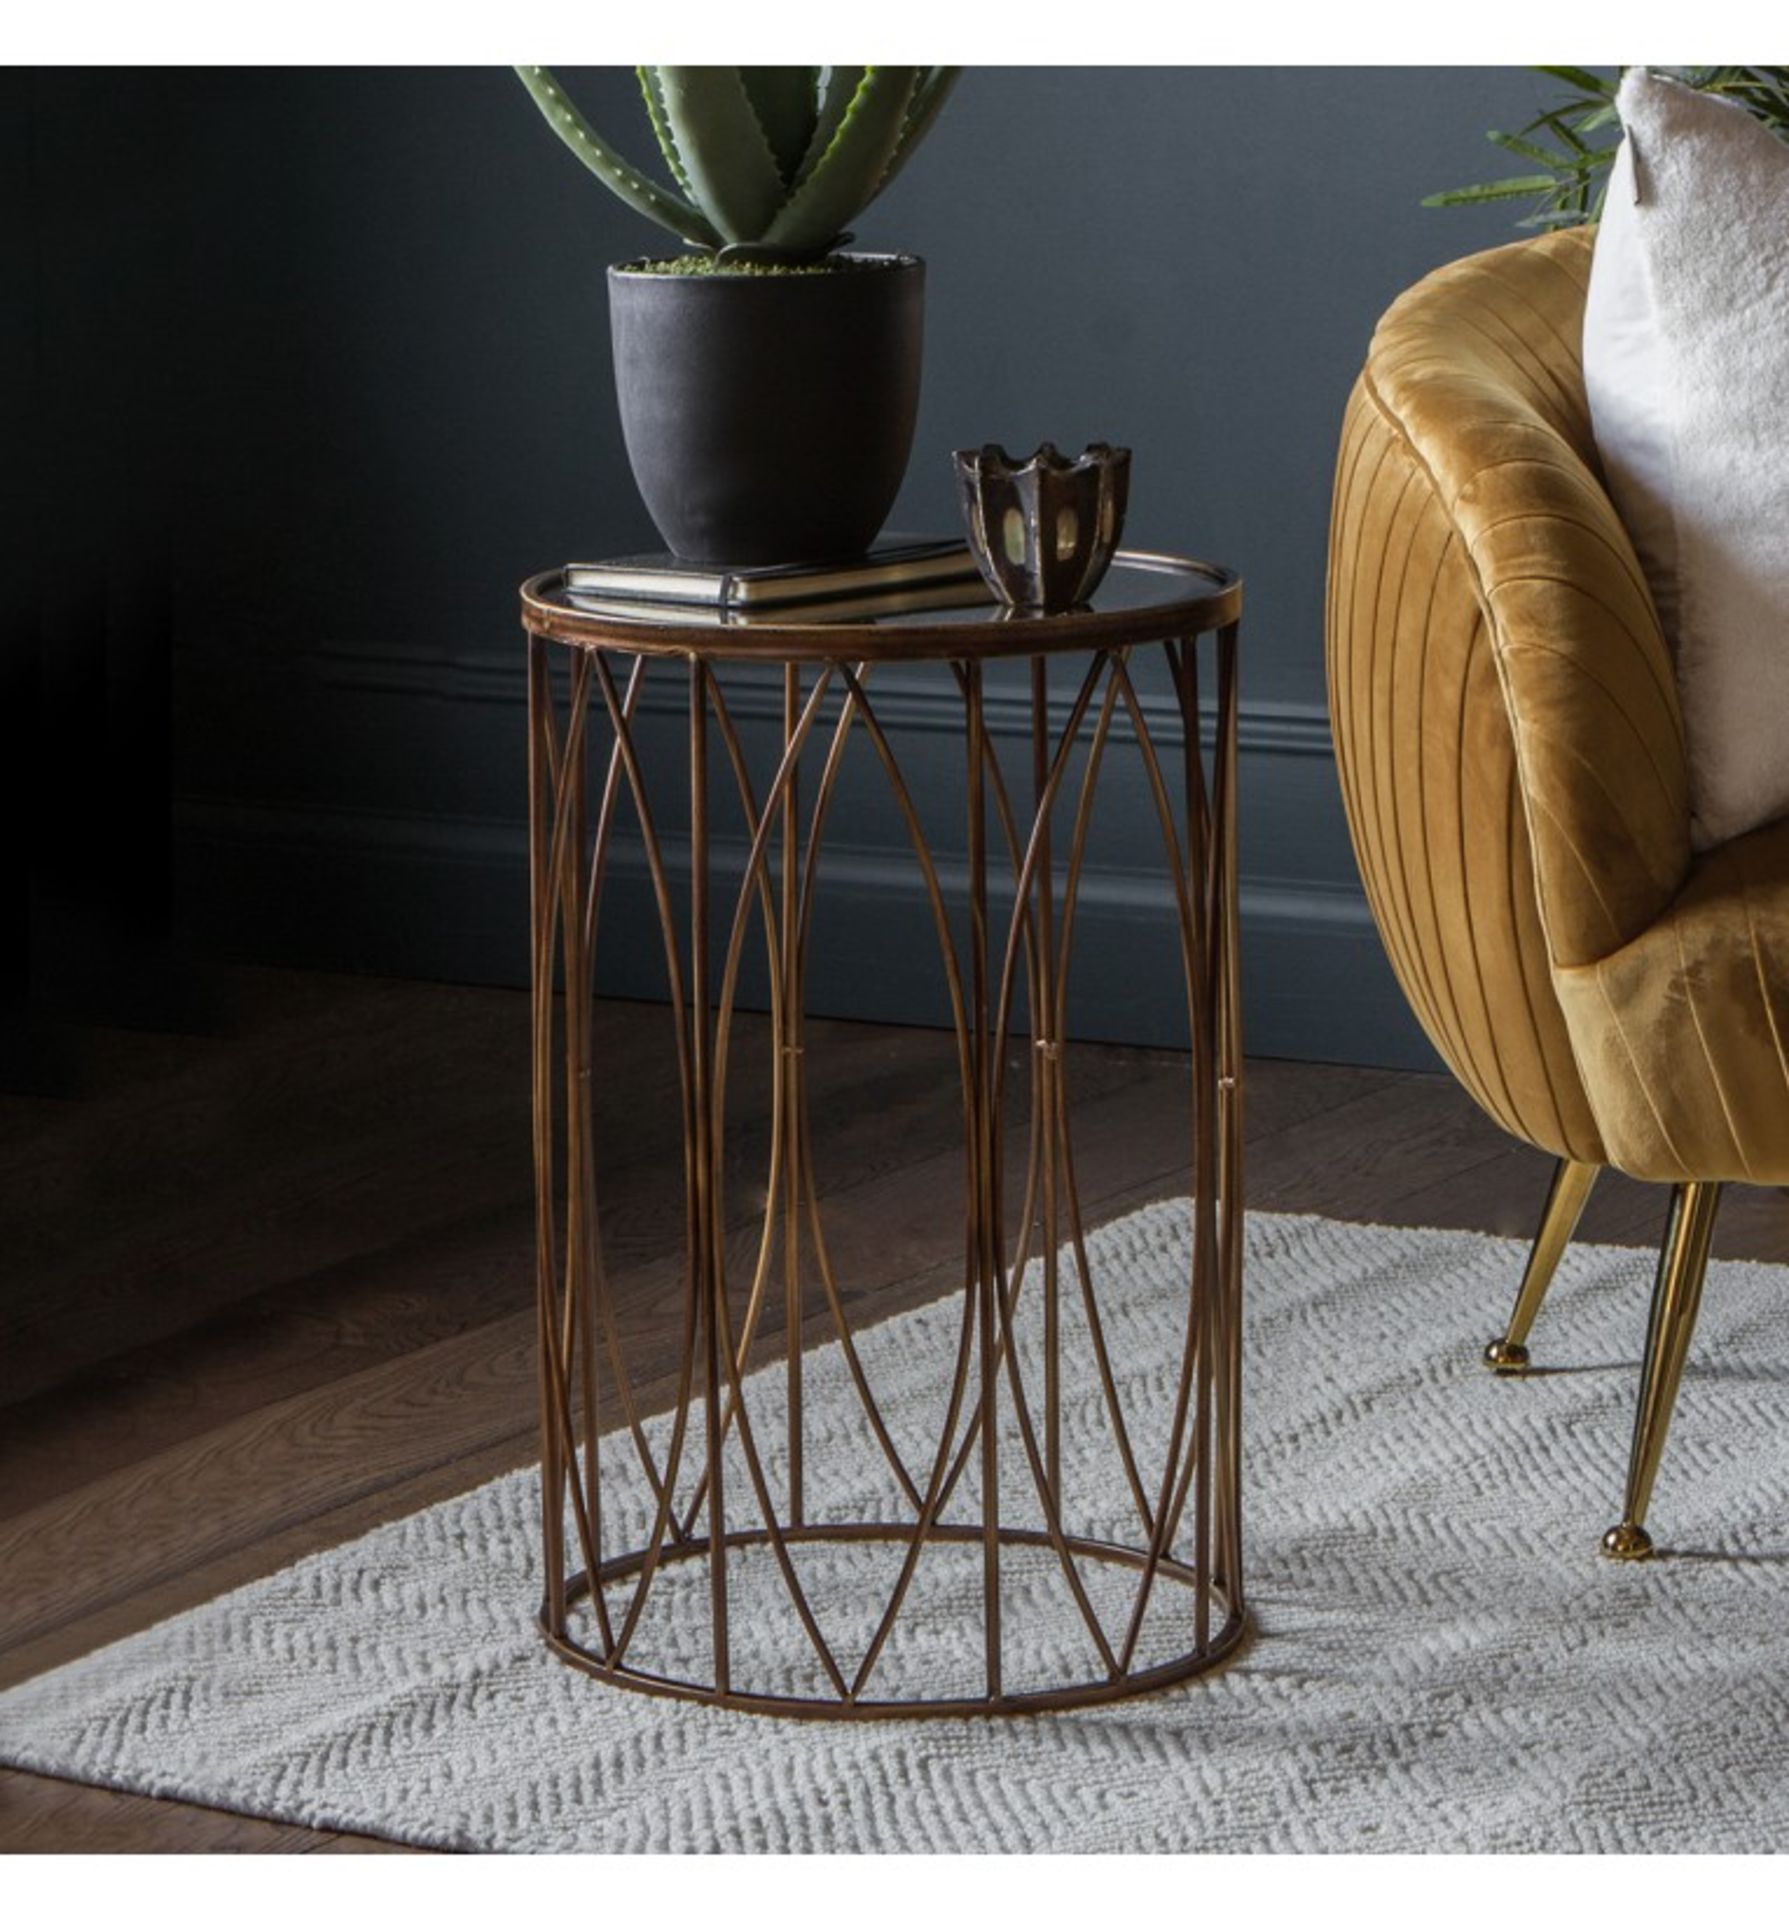 Highgate side table A stylish and practical side table with an antiqued glass top in a bronze effect